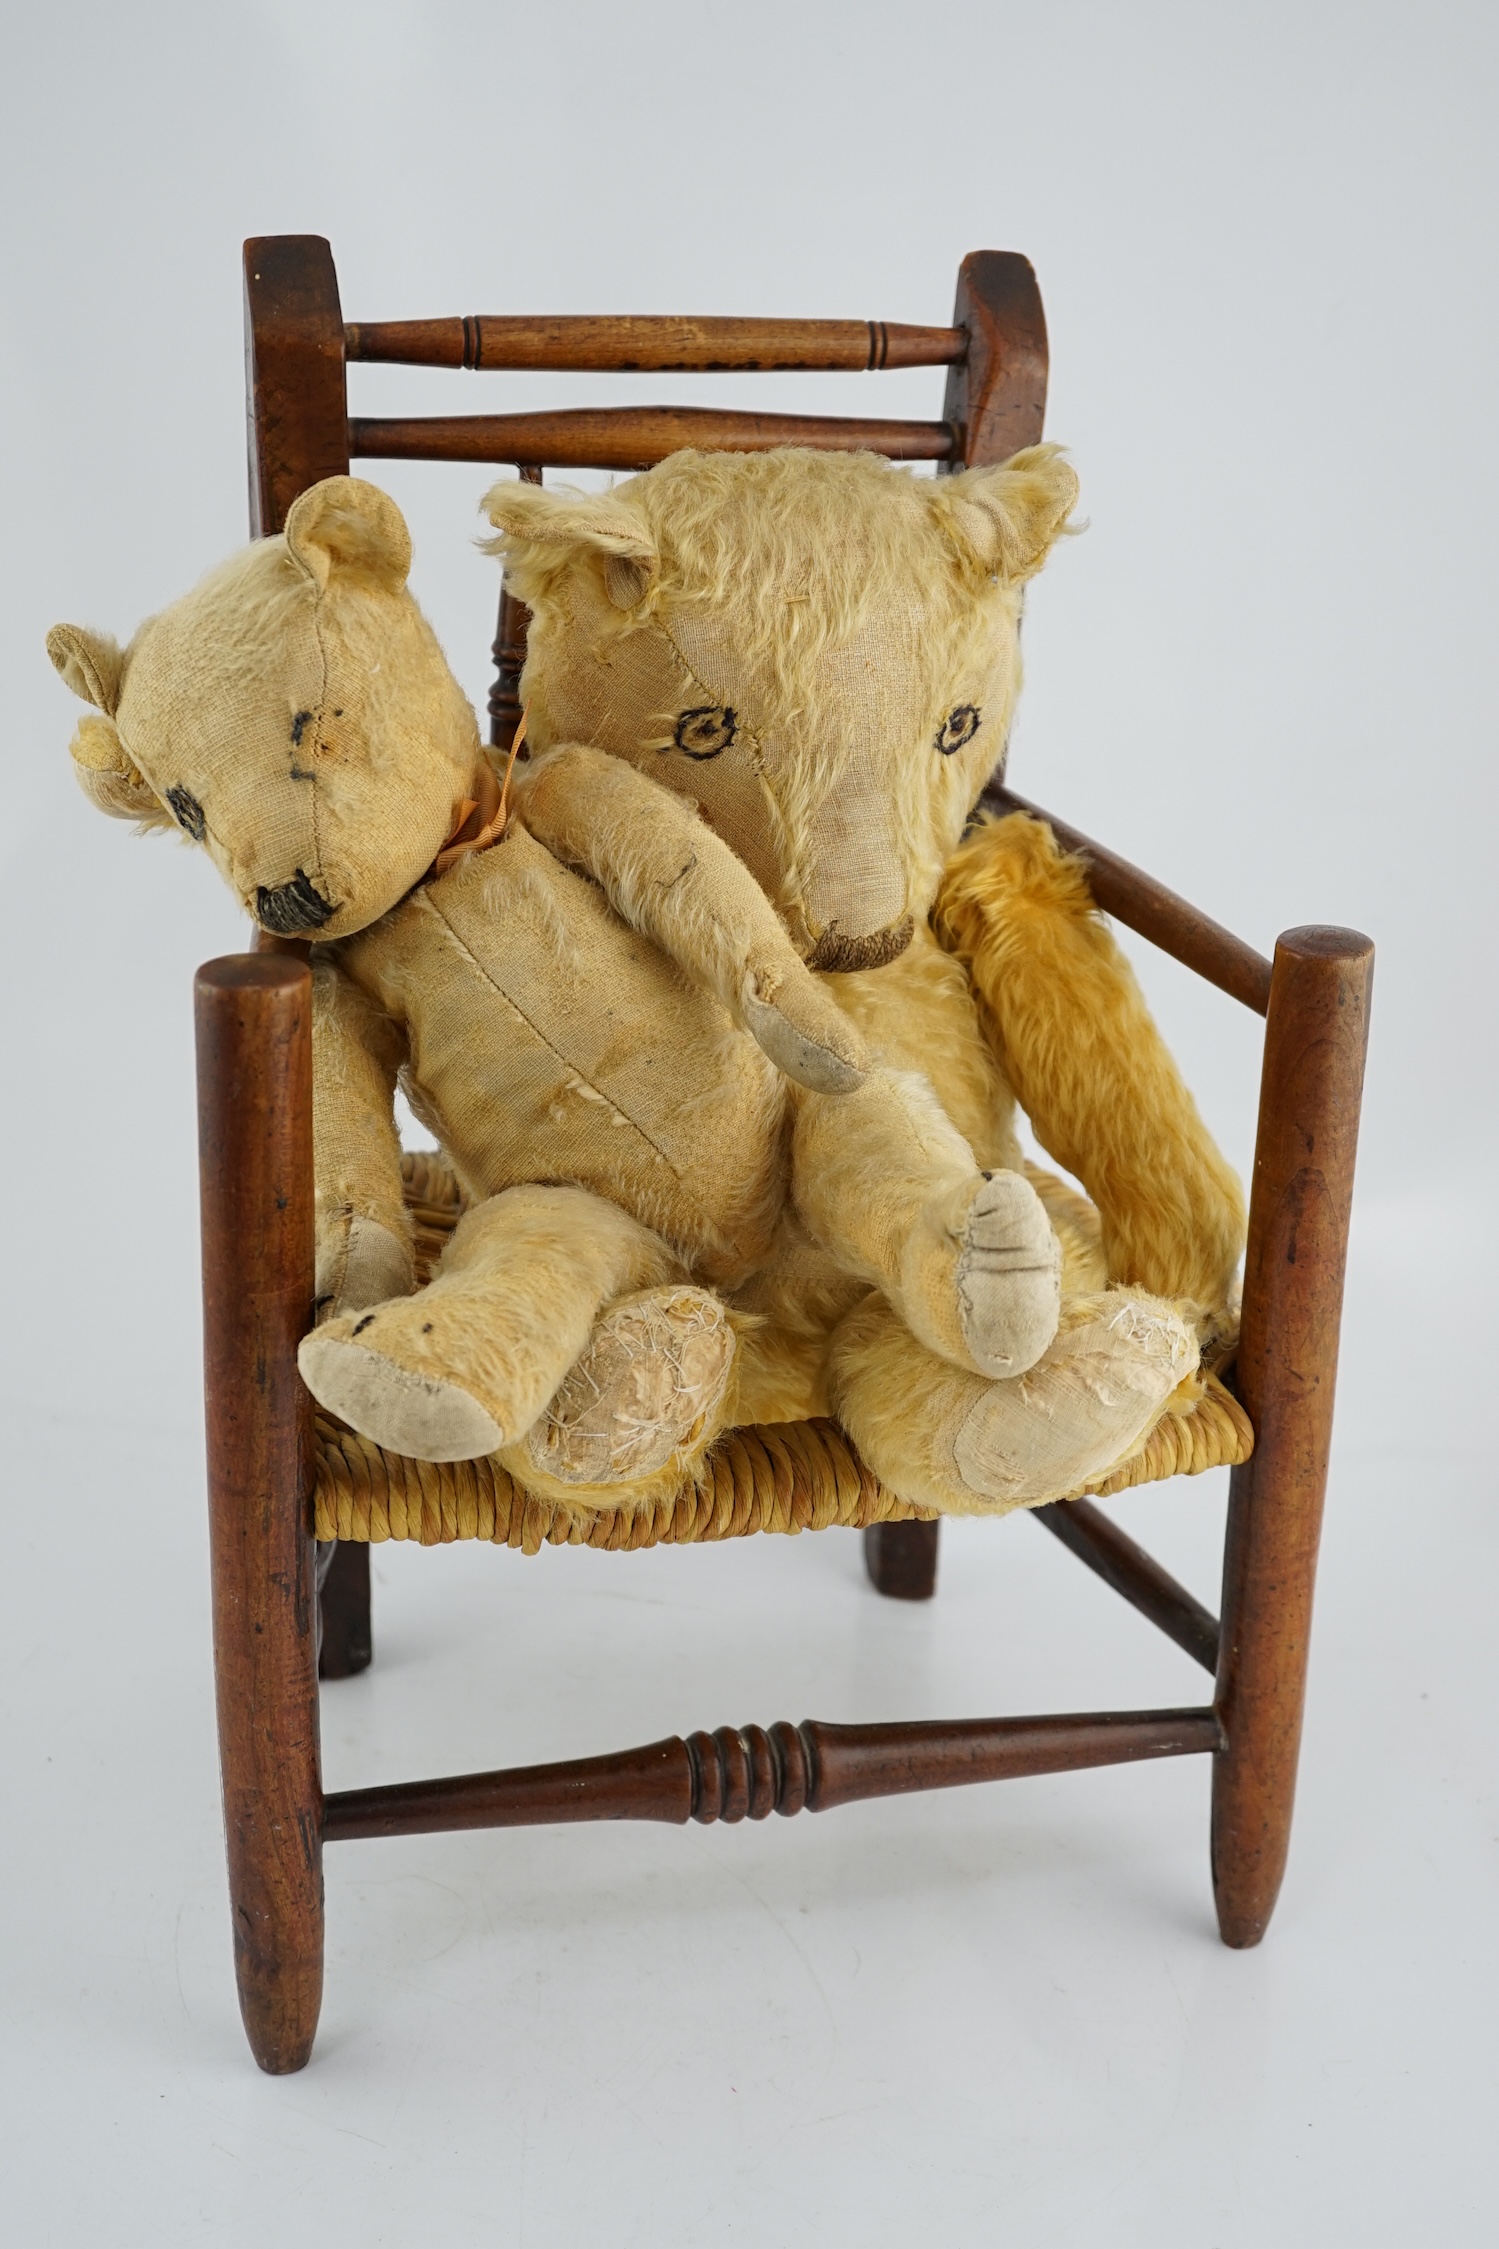 Two teddy bears and a child's chair